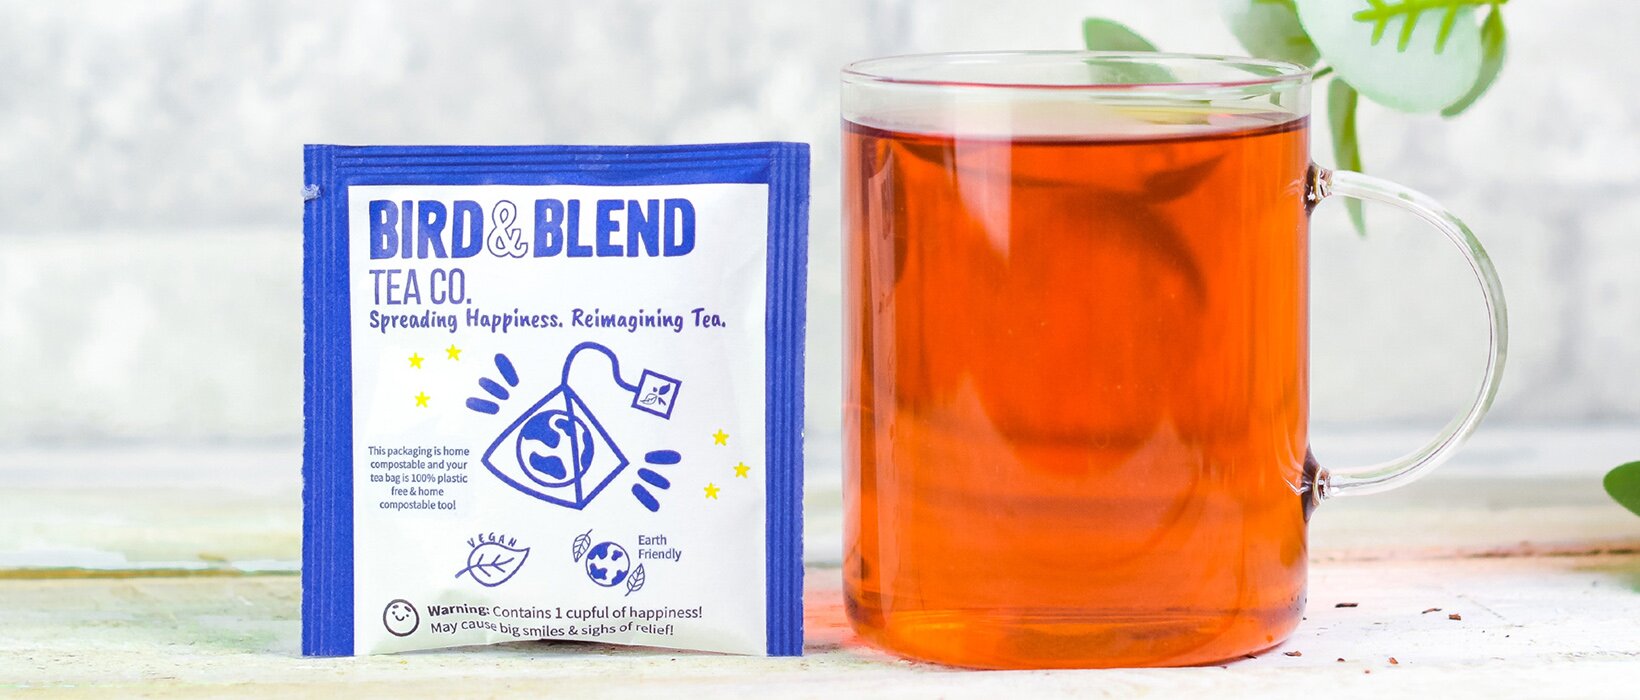 Demand for decaffeinated tea is on the rise